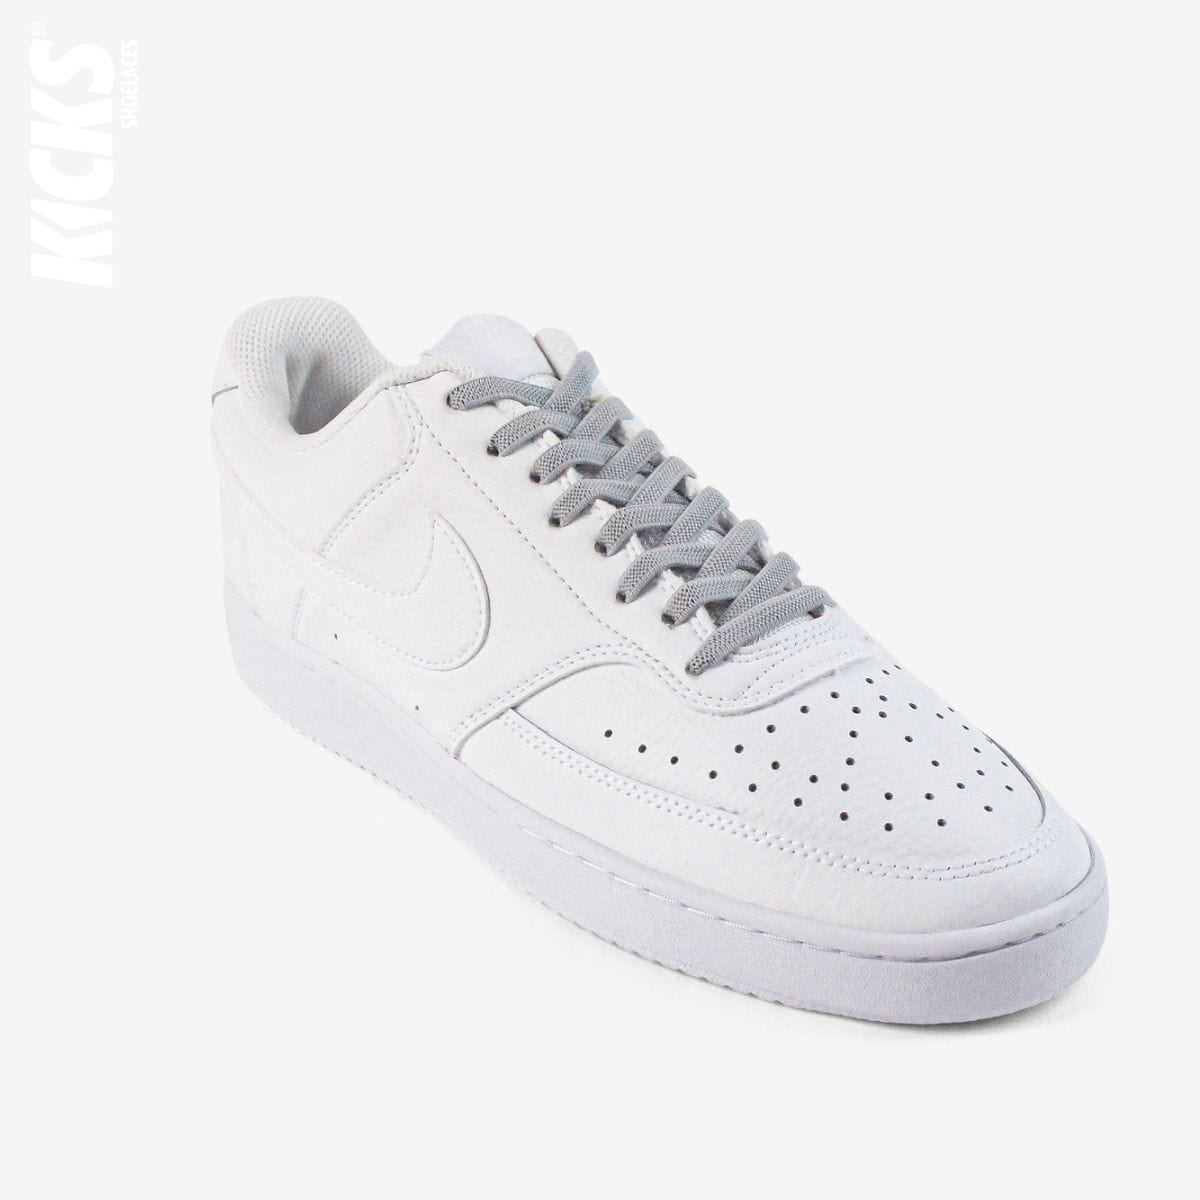 no-tie-shoelaces-with-light-grey-laces-on-nike-white-sneakers-by-kicks-shoelaces